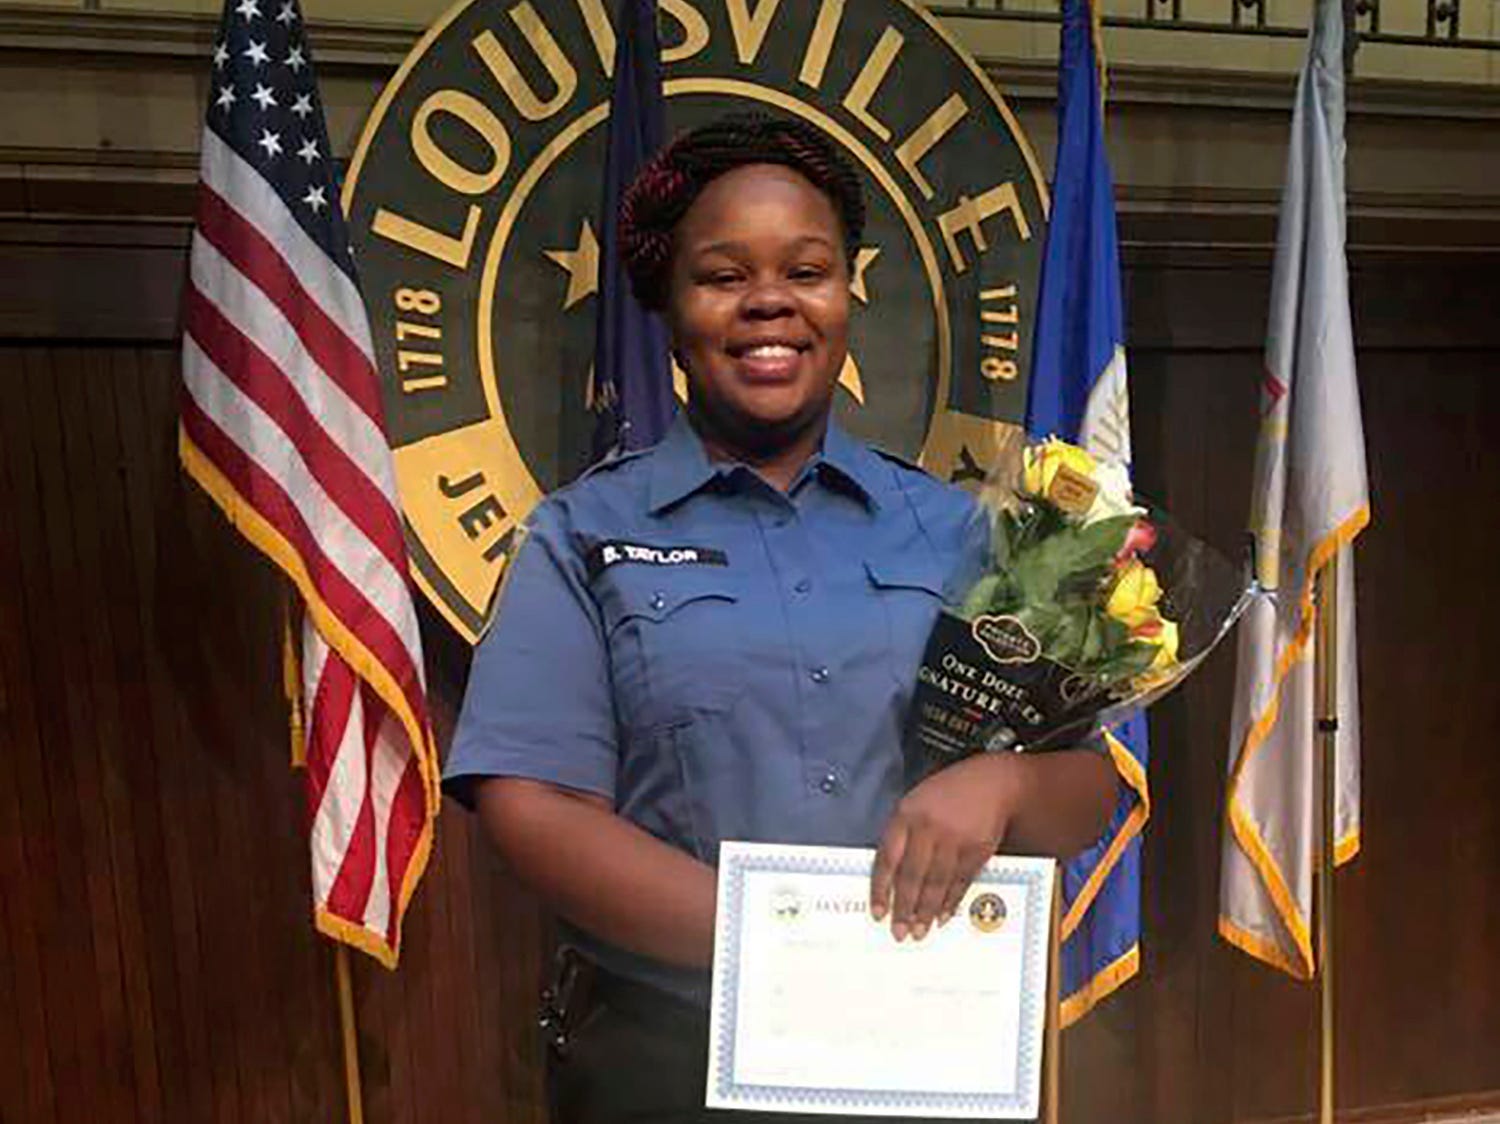 This undated photo provided by Taylor family attorney Sam Aguiar shows Breonna Taylor  in Louisville, Ky.  Three months after plainclothes detectives serving a warrant busted into Tylor's apartment on March 13, 2020, and shot the 26-year-old Black woman to death, only one of the three officers who opened fire has lost his job.  Calls for action against the officers have gotten louder during a national reckoning over racism and police brutality following George Floyd's death in Minneapolis.  (Photo provided by Taylor family attorney Sam Aguiar via AP)